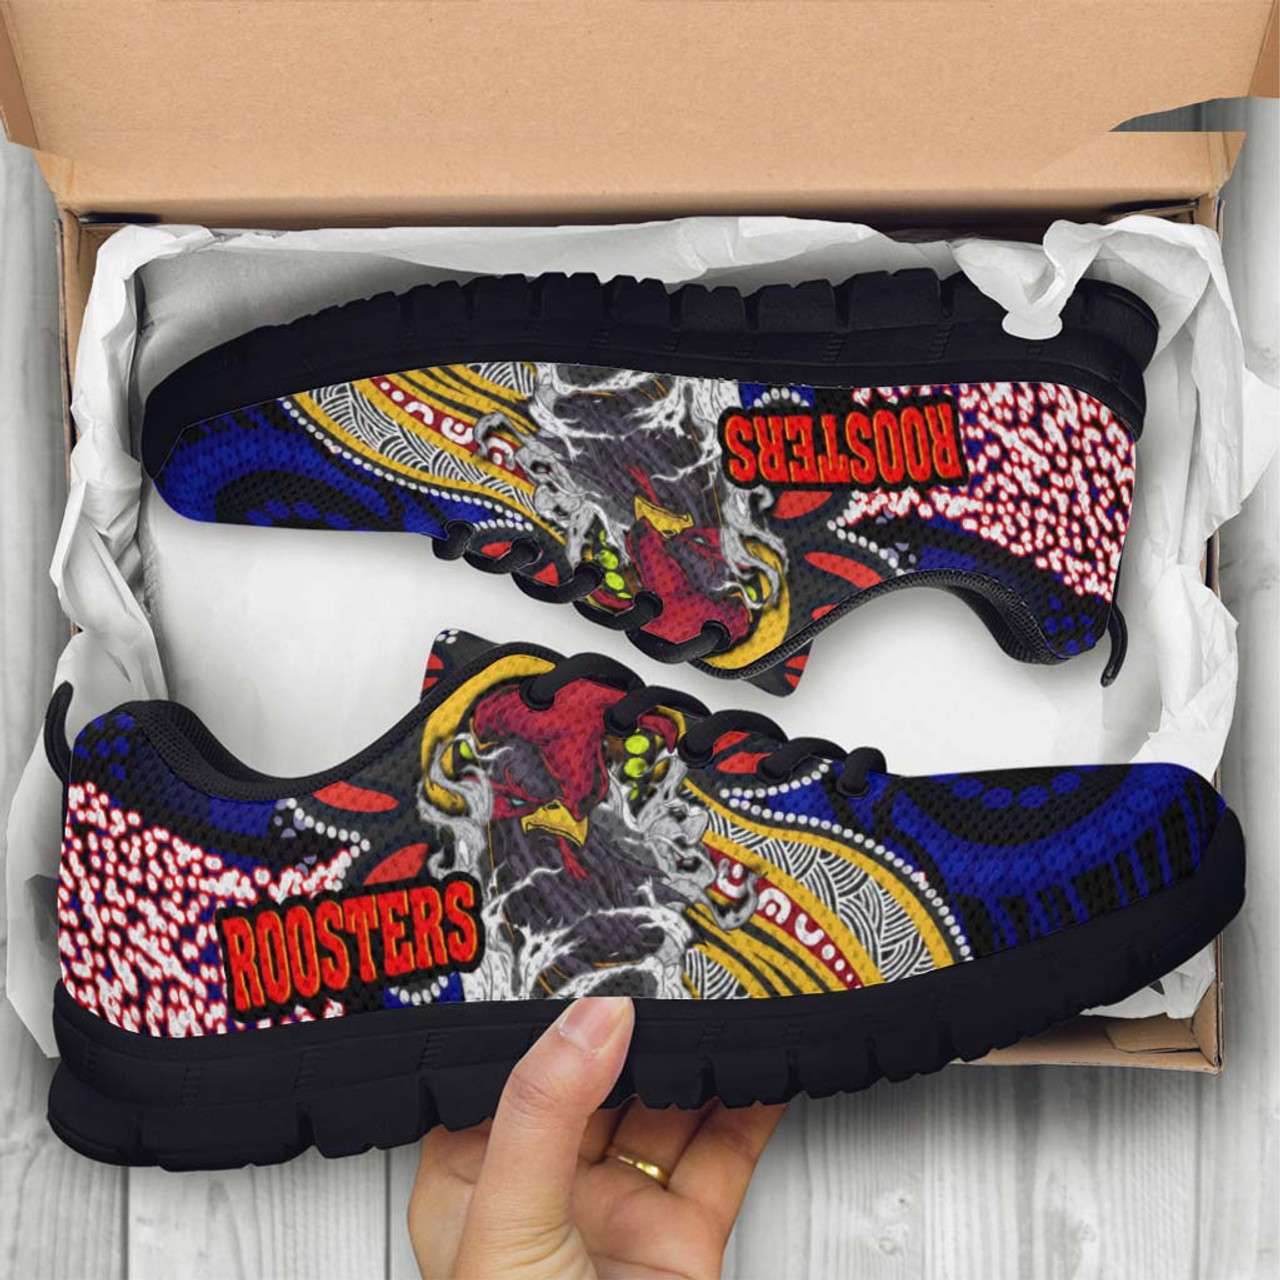 Sydney Roosters Sneakers - Angry Rooster with Aboriginal Inspired ...